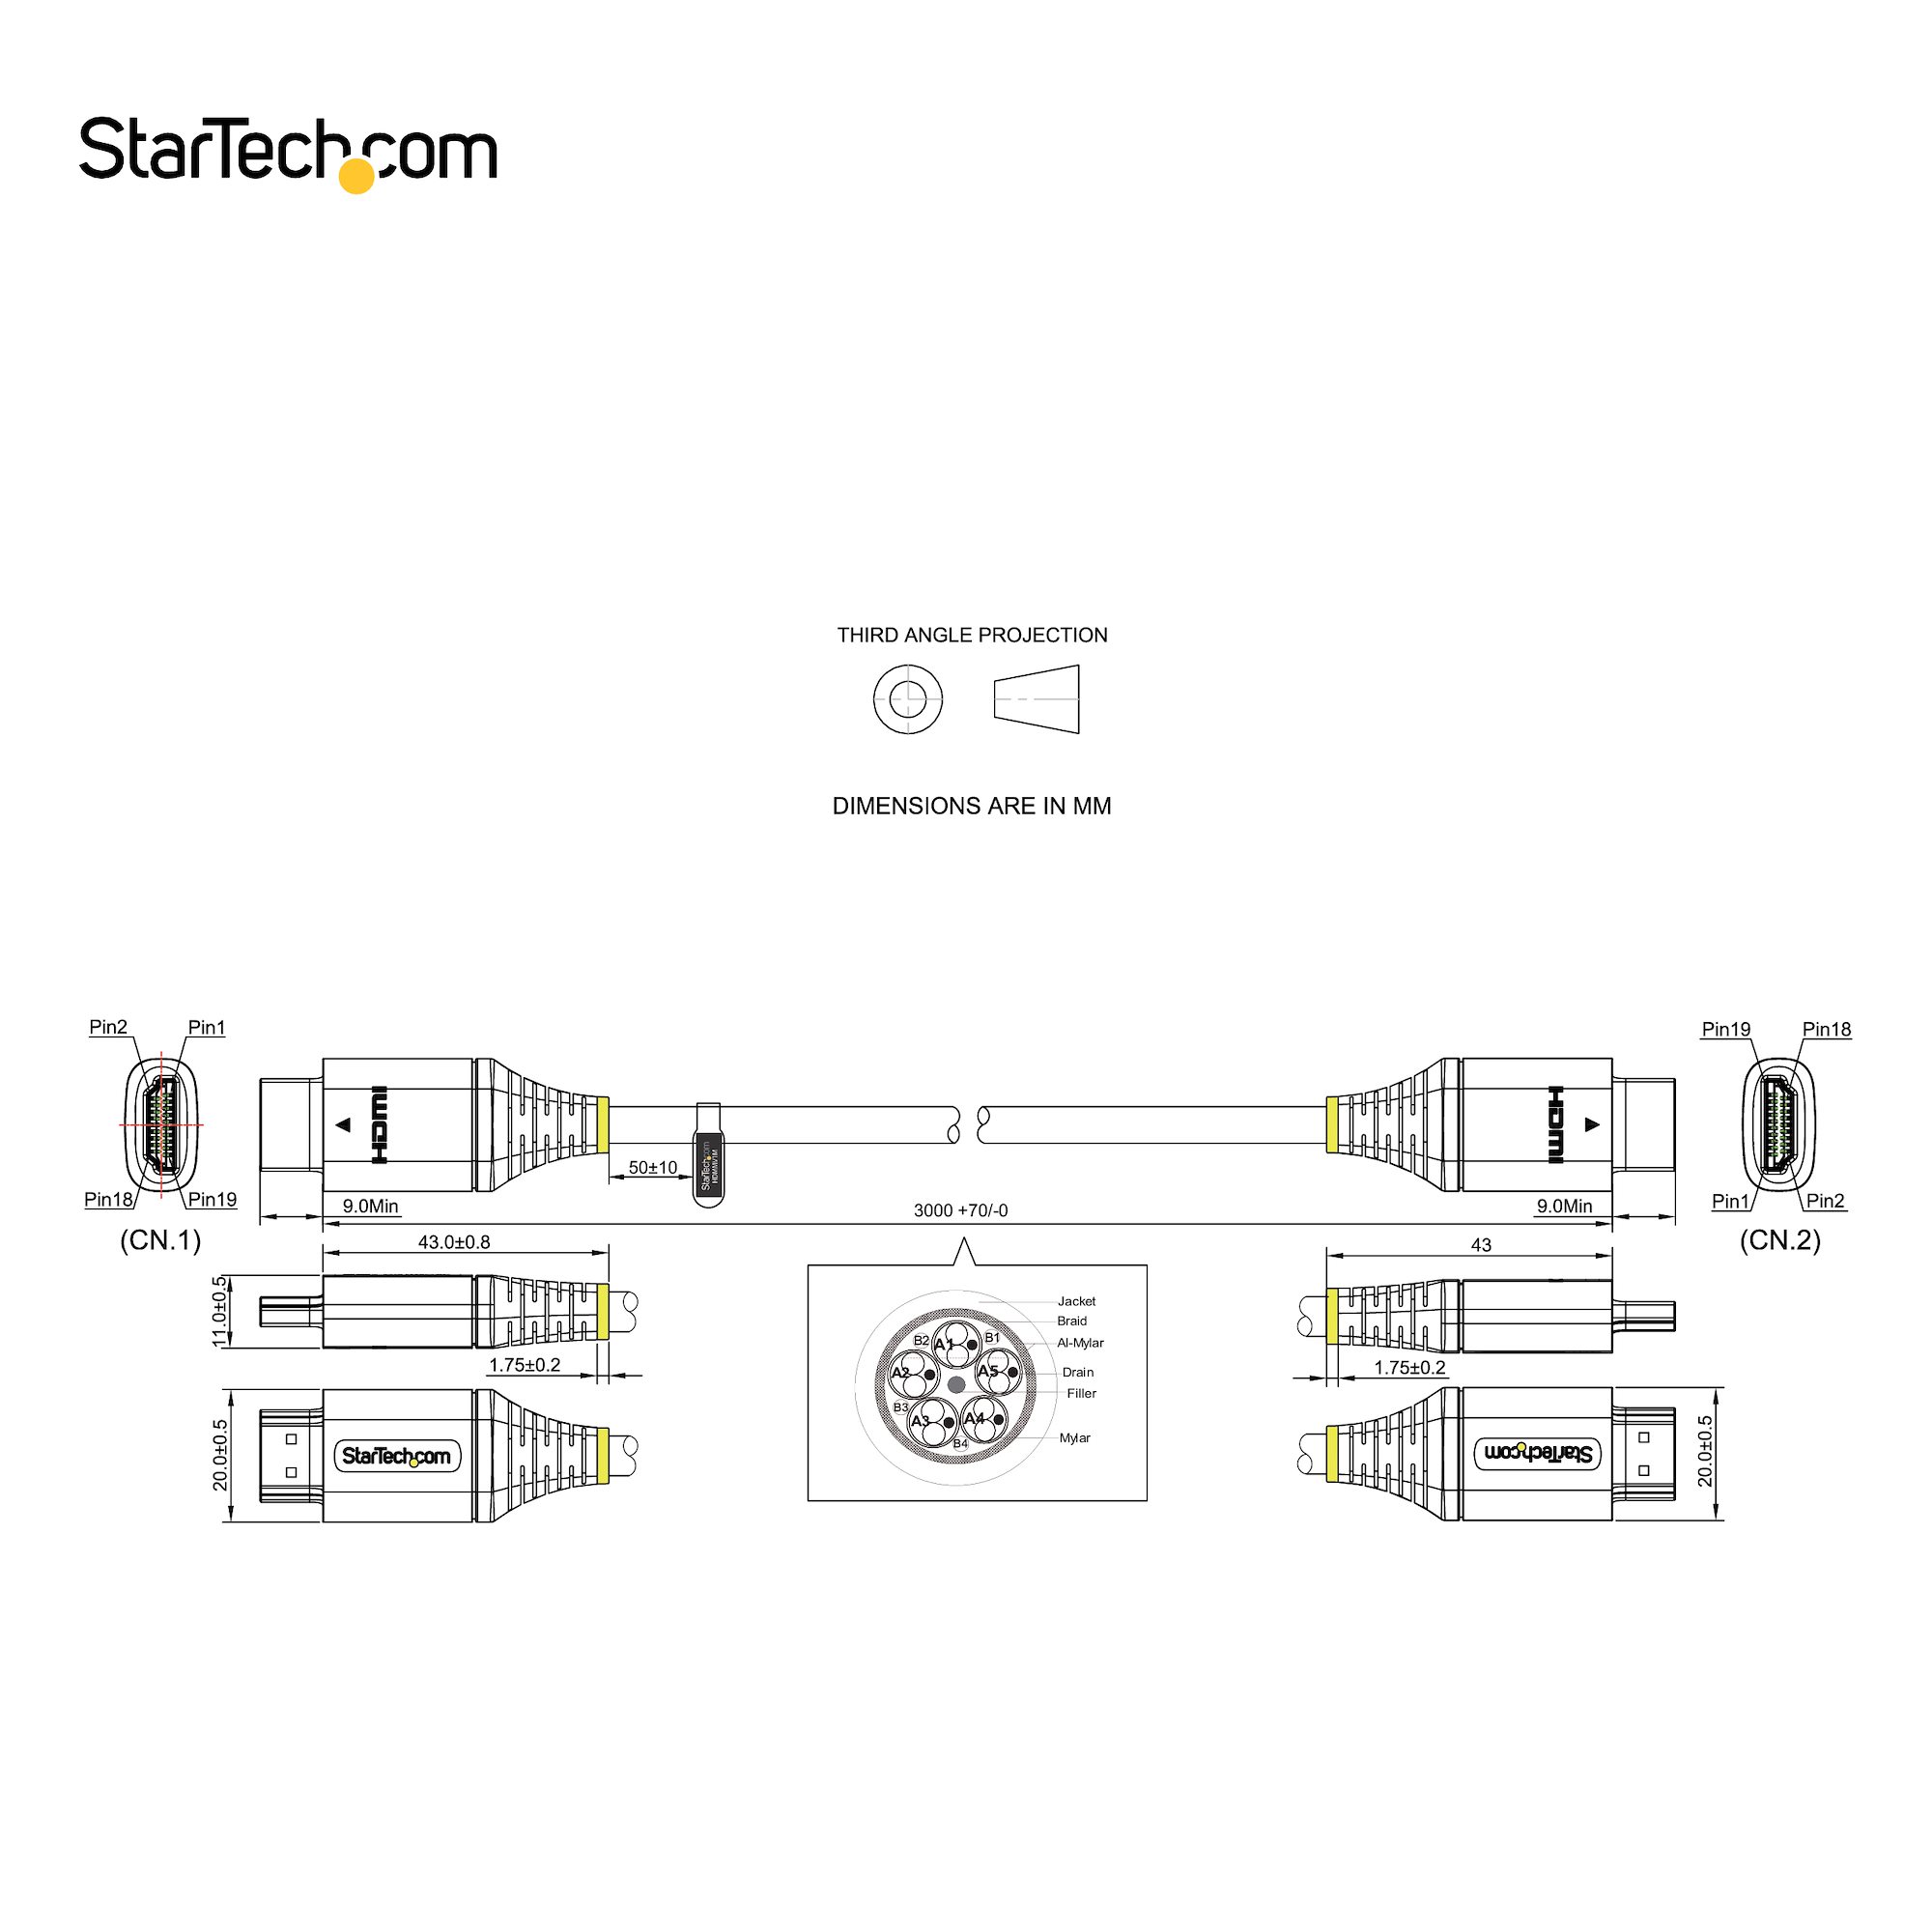 Startech .com 10ft/3m HDMI Cable, 4K High Speed HDMI Cable with Ethernet, Ultra  HD 4K 30Hz Video, HDMI 1.4 Cable, HDMI Monitor Cord, Black10ft HDMM10 -  Corporate Armor